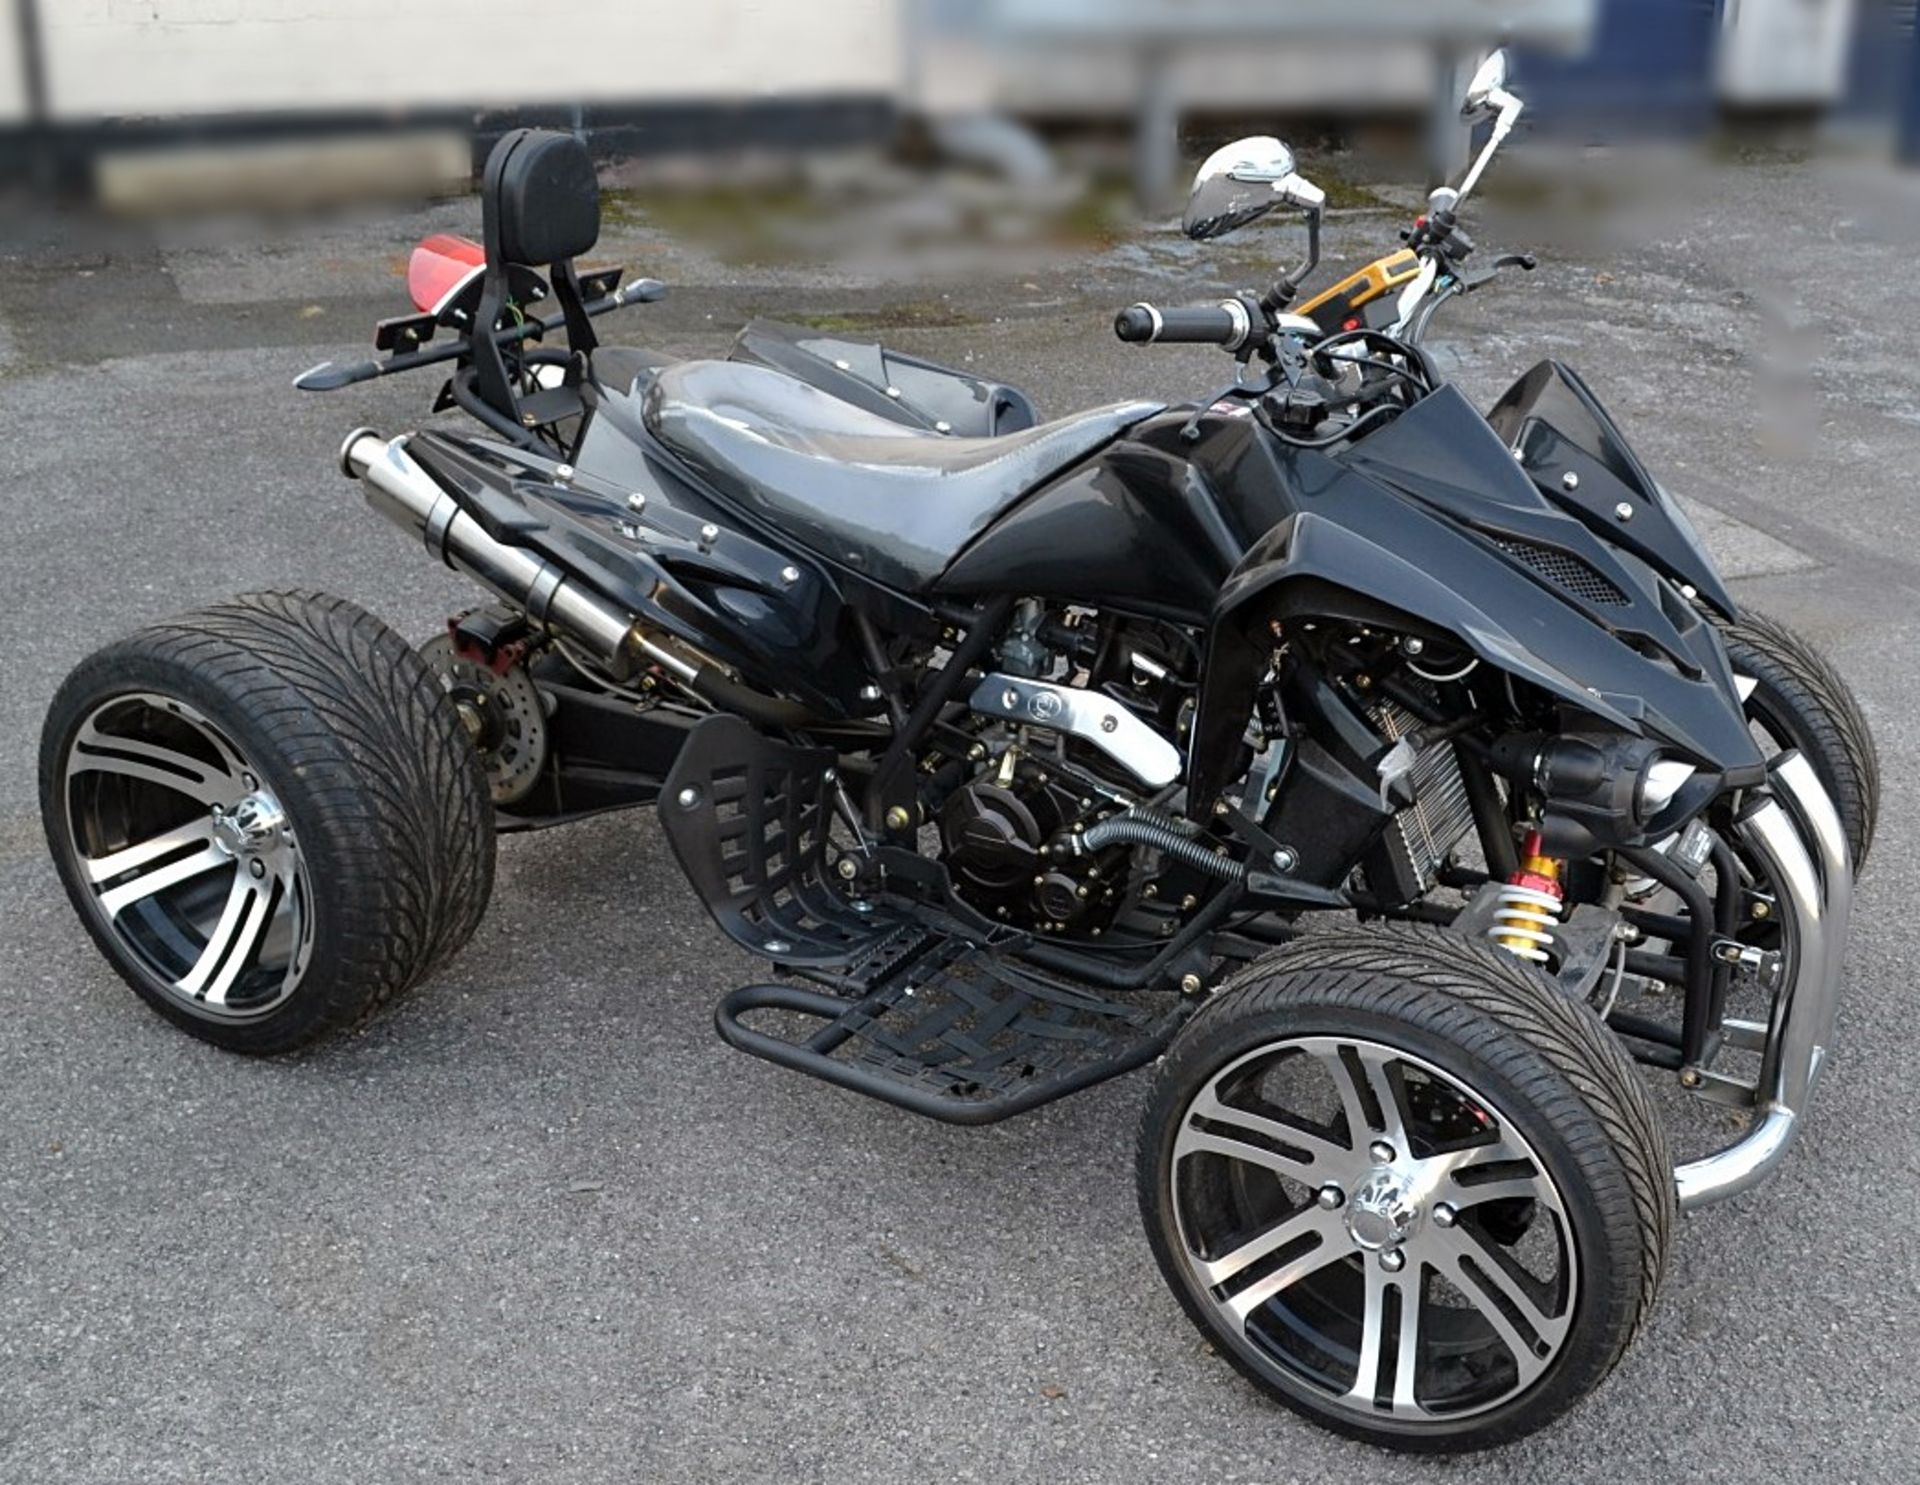 1 x Jinling ATV Adult Quad Bike - 250cc - Colour: Black - Pre-owned In Good Overall Condition With - Image 22 of 22